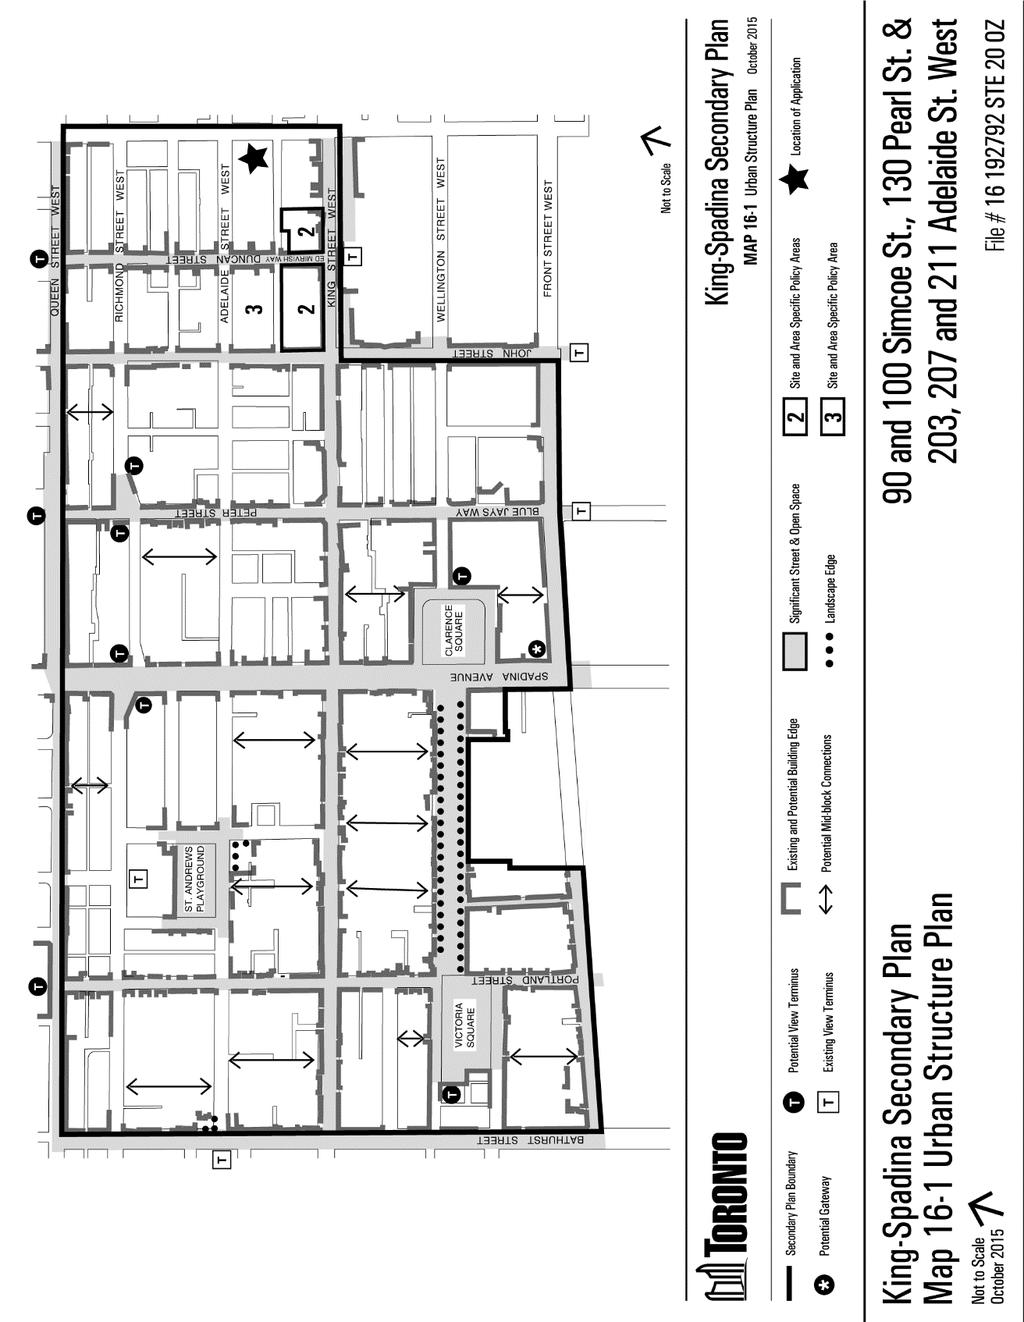 Attachment 5: King-Spadina Secondary Plan Urban Structure Plan 90 and 100